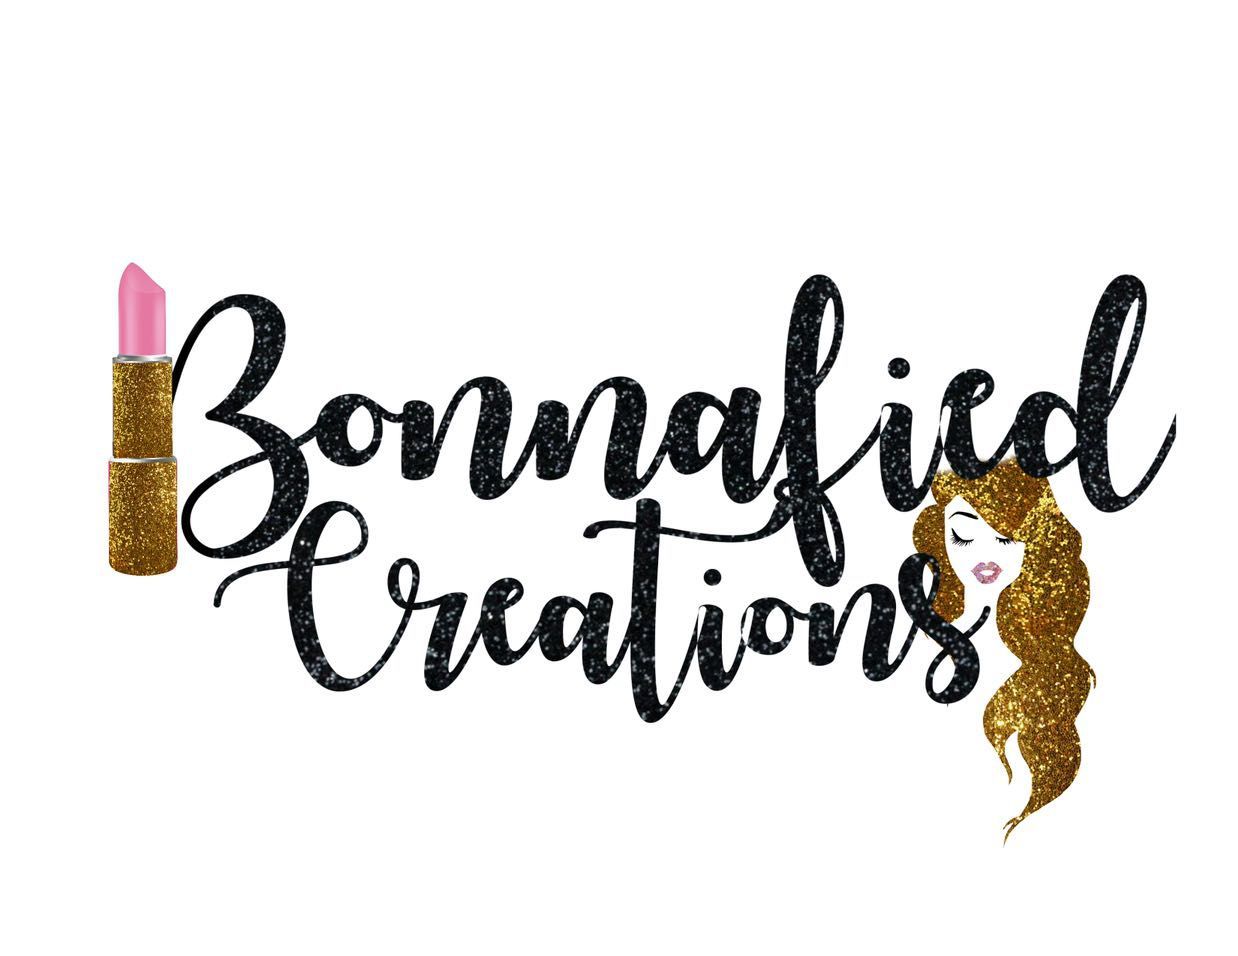 Bonnafied_Creations, 18525 Torrence Ave, Lansing, 60438